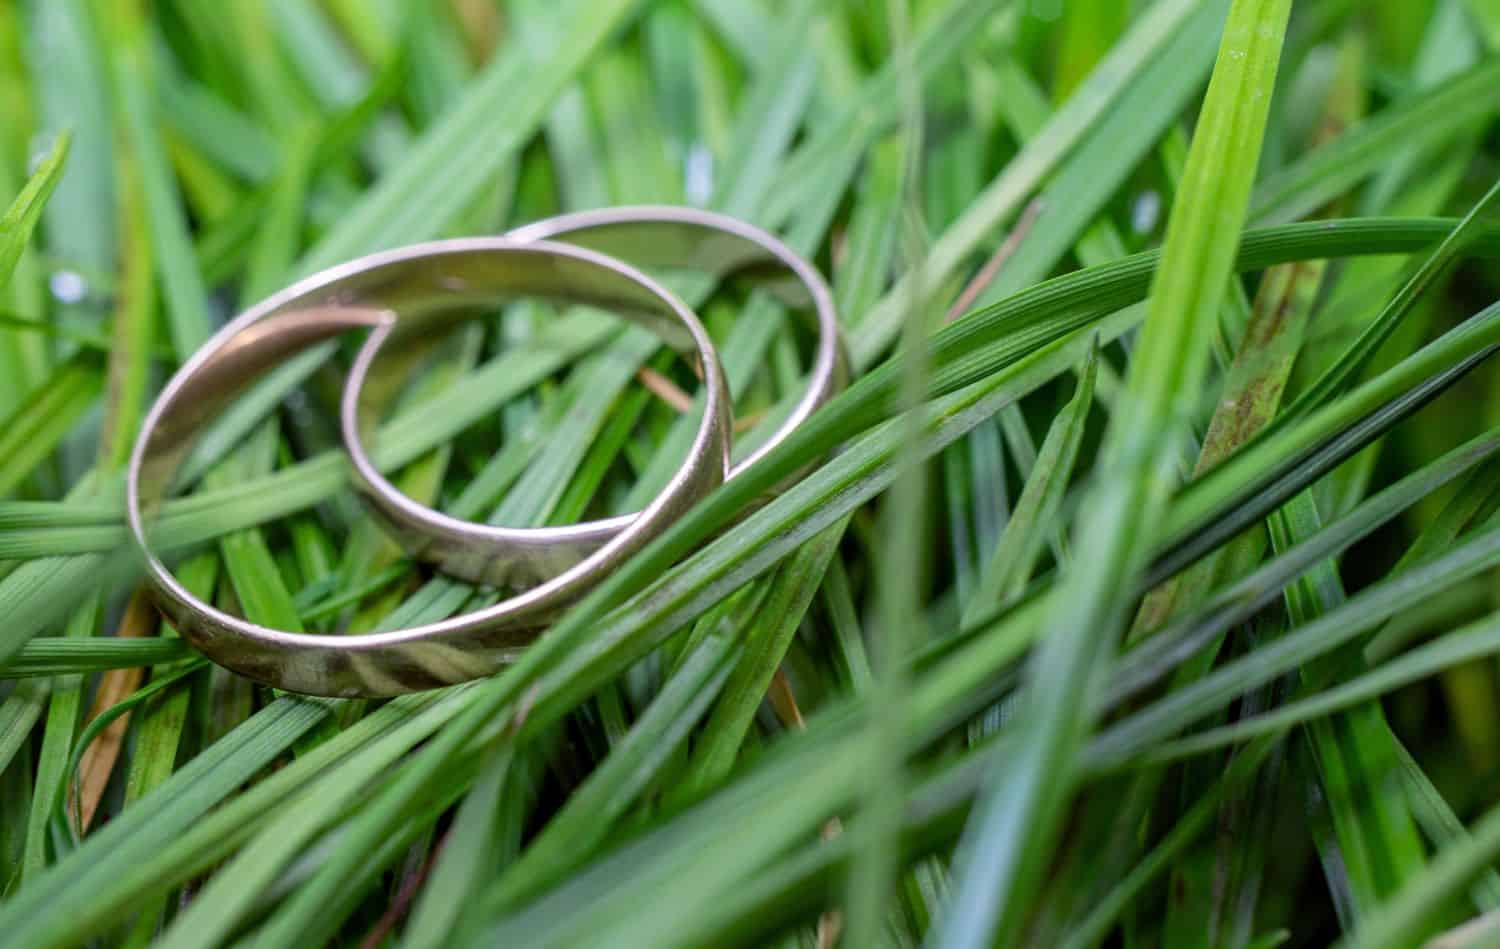 How To Find A Ring In The Grass